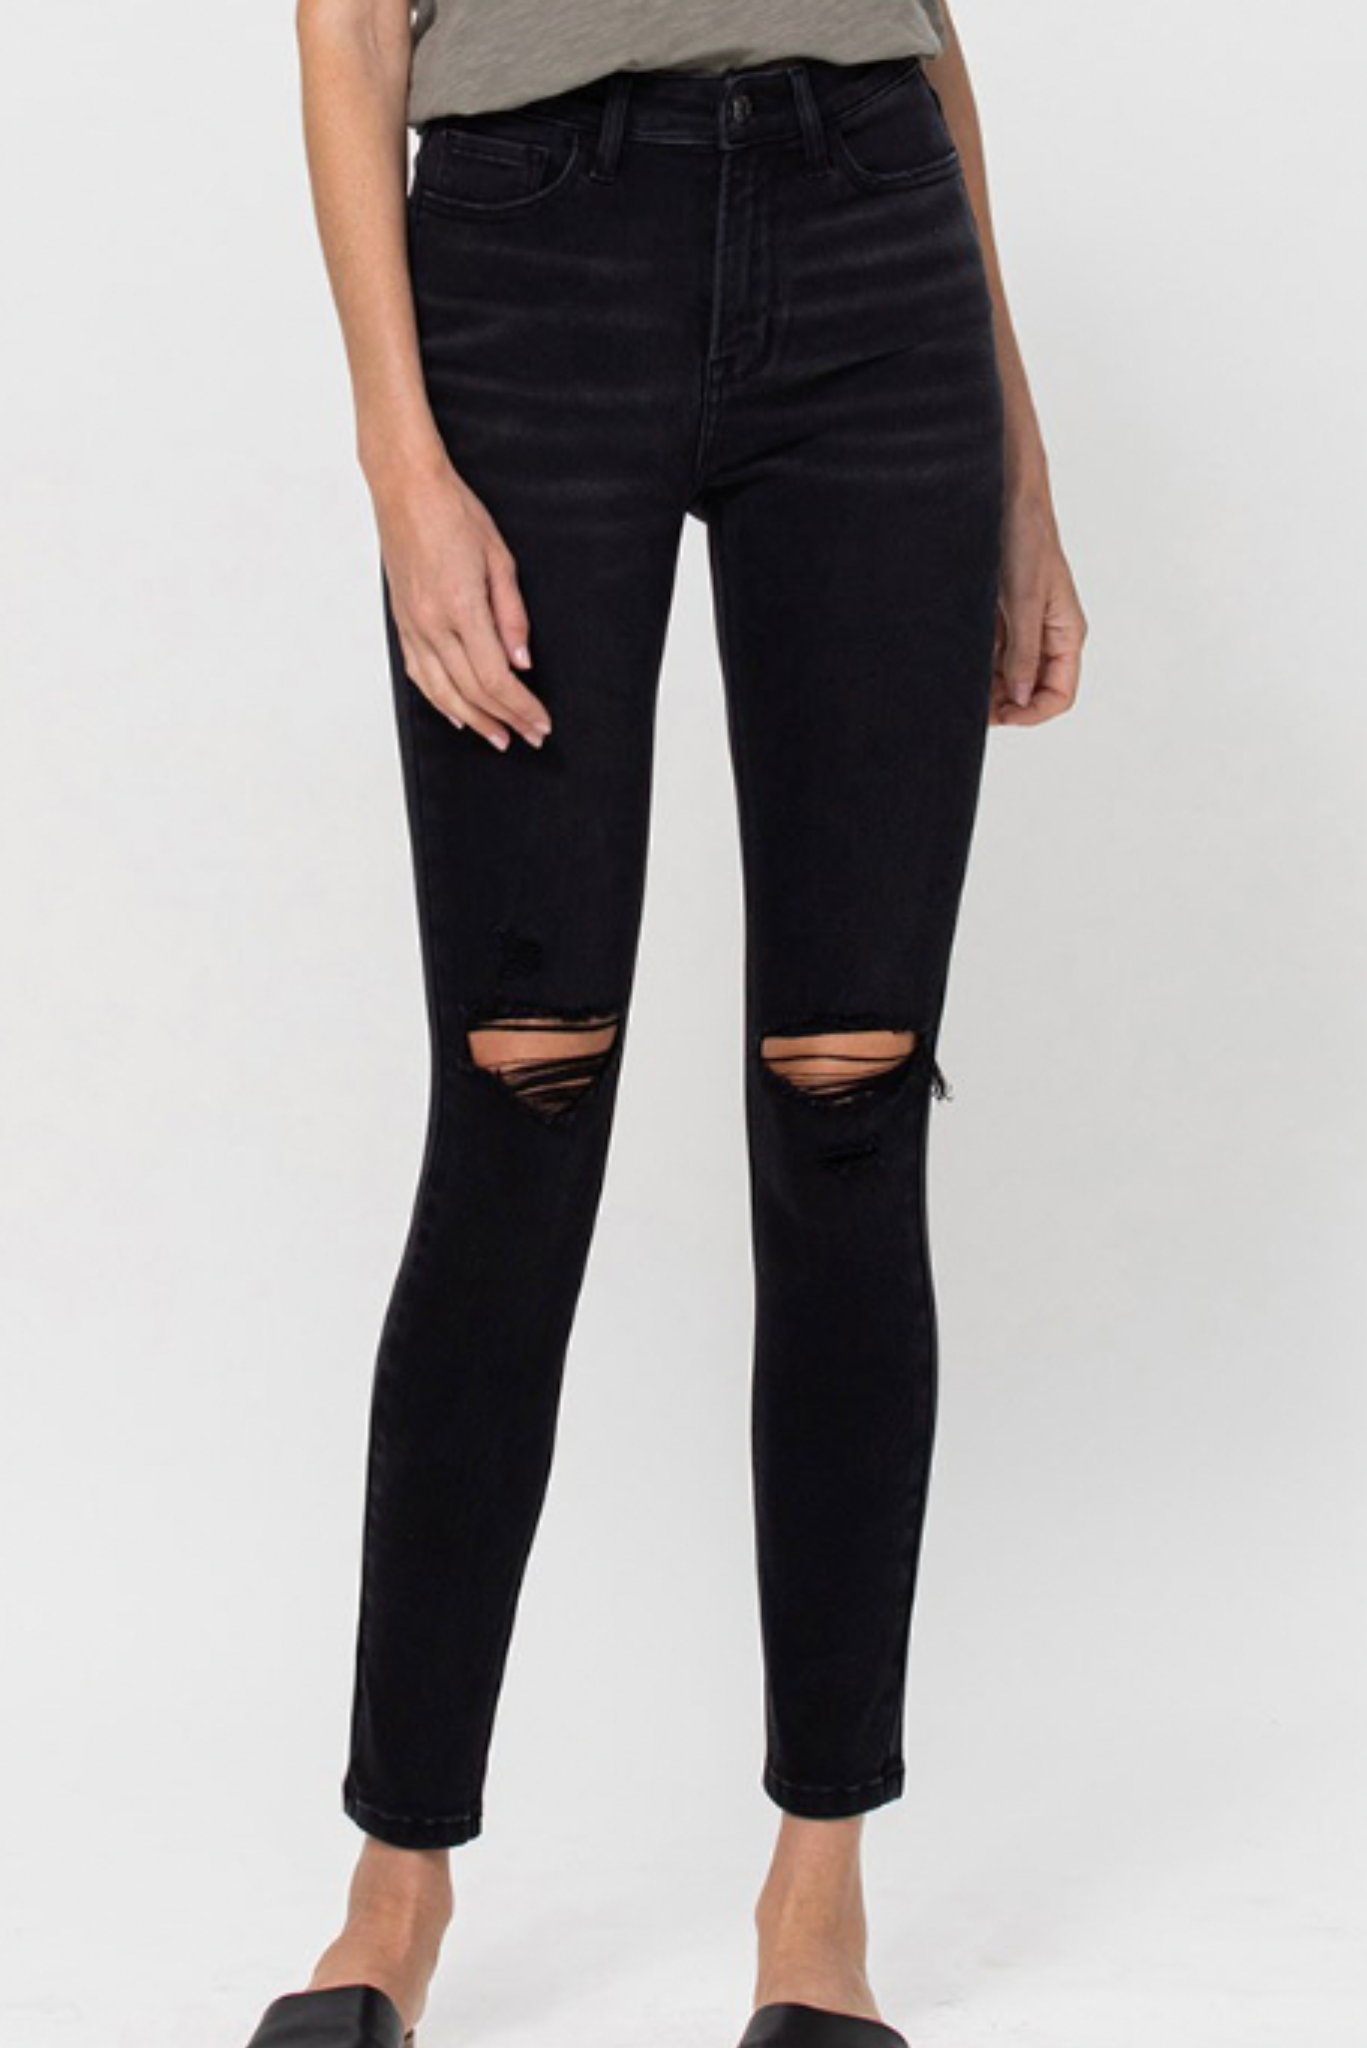 Load image into Gallery viewer, Black High Rise Distressed Skinny Jeans, black jeans, skinny black denim, distressed black denim, Shop Style Your Senses By Mallory Fitzsimmons
